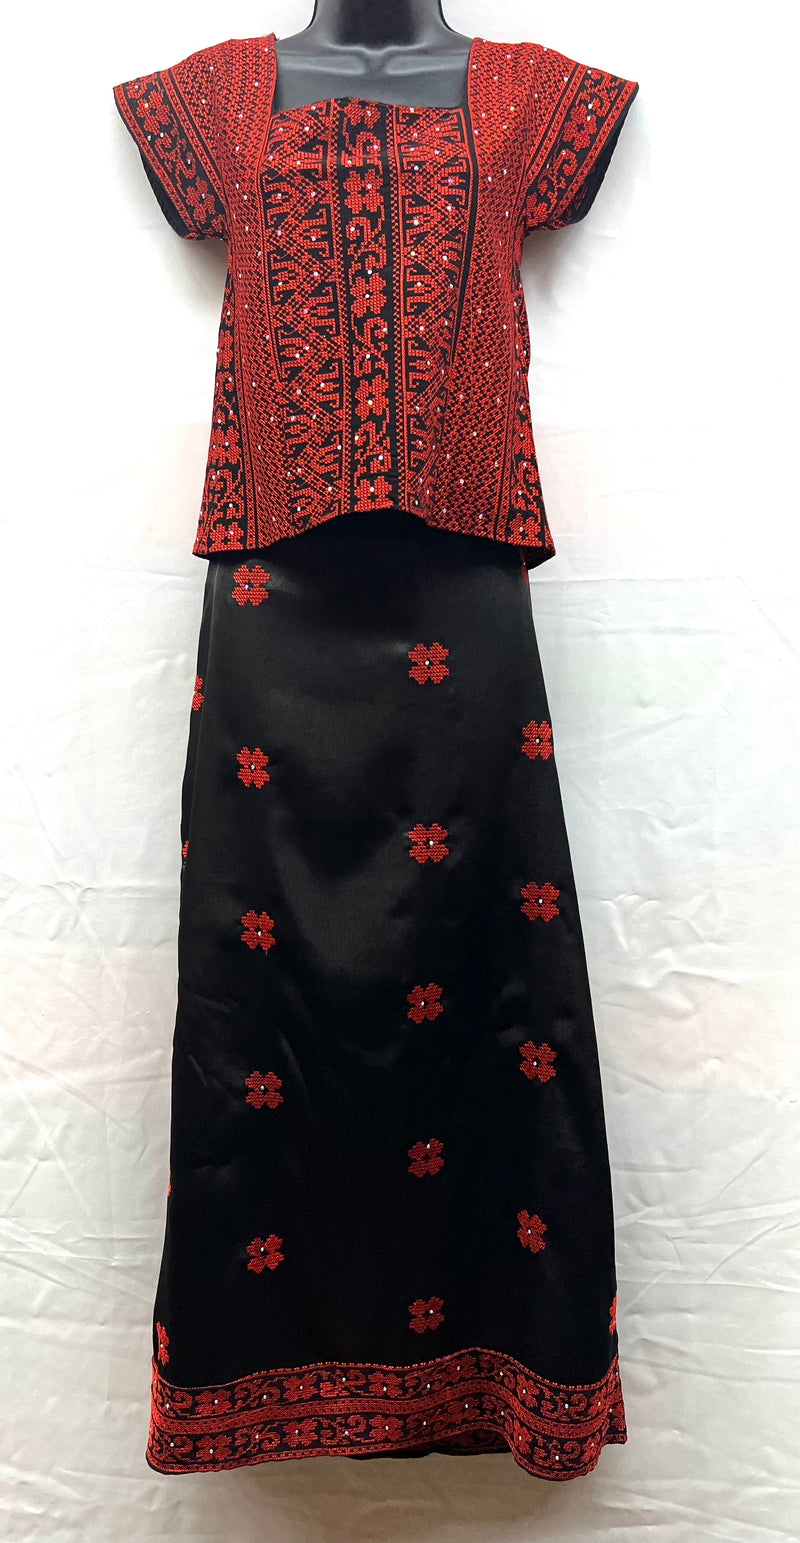 indian style 3pc embroidered dress with chiffon scarf & lace up fabric shirt & satin skirt black with red stitching & rhinestones sizes [2]